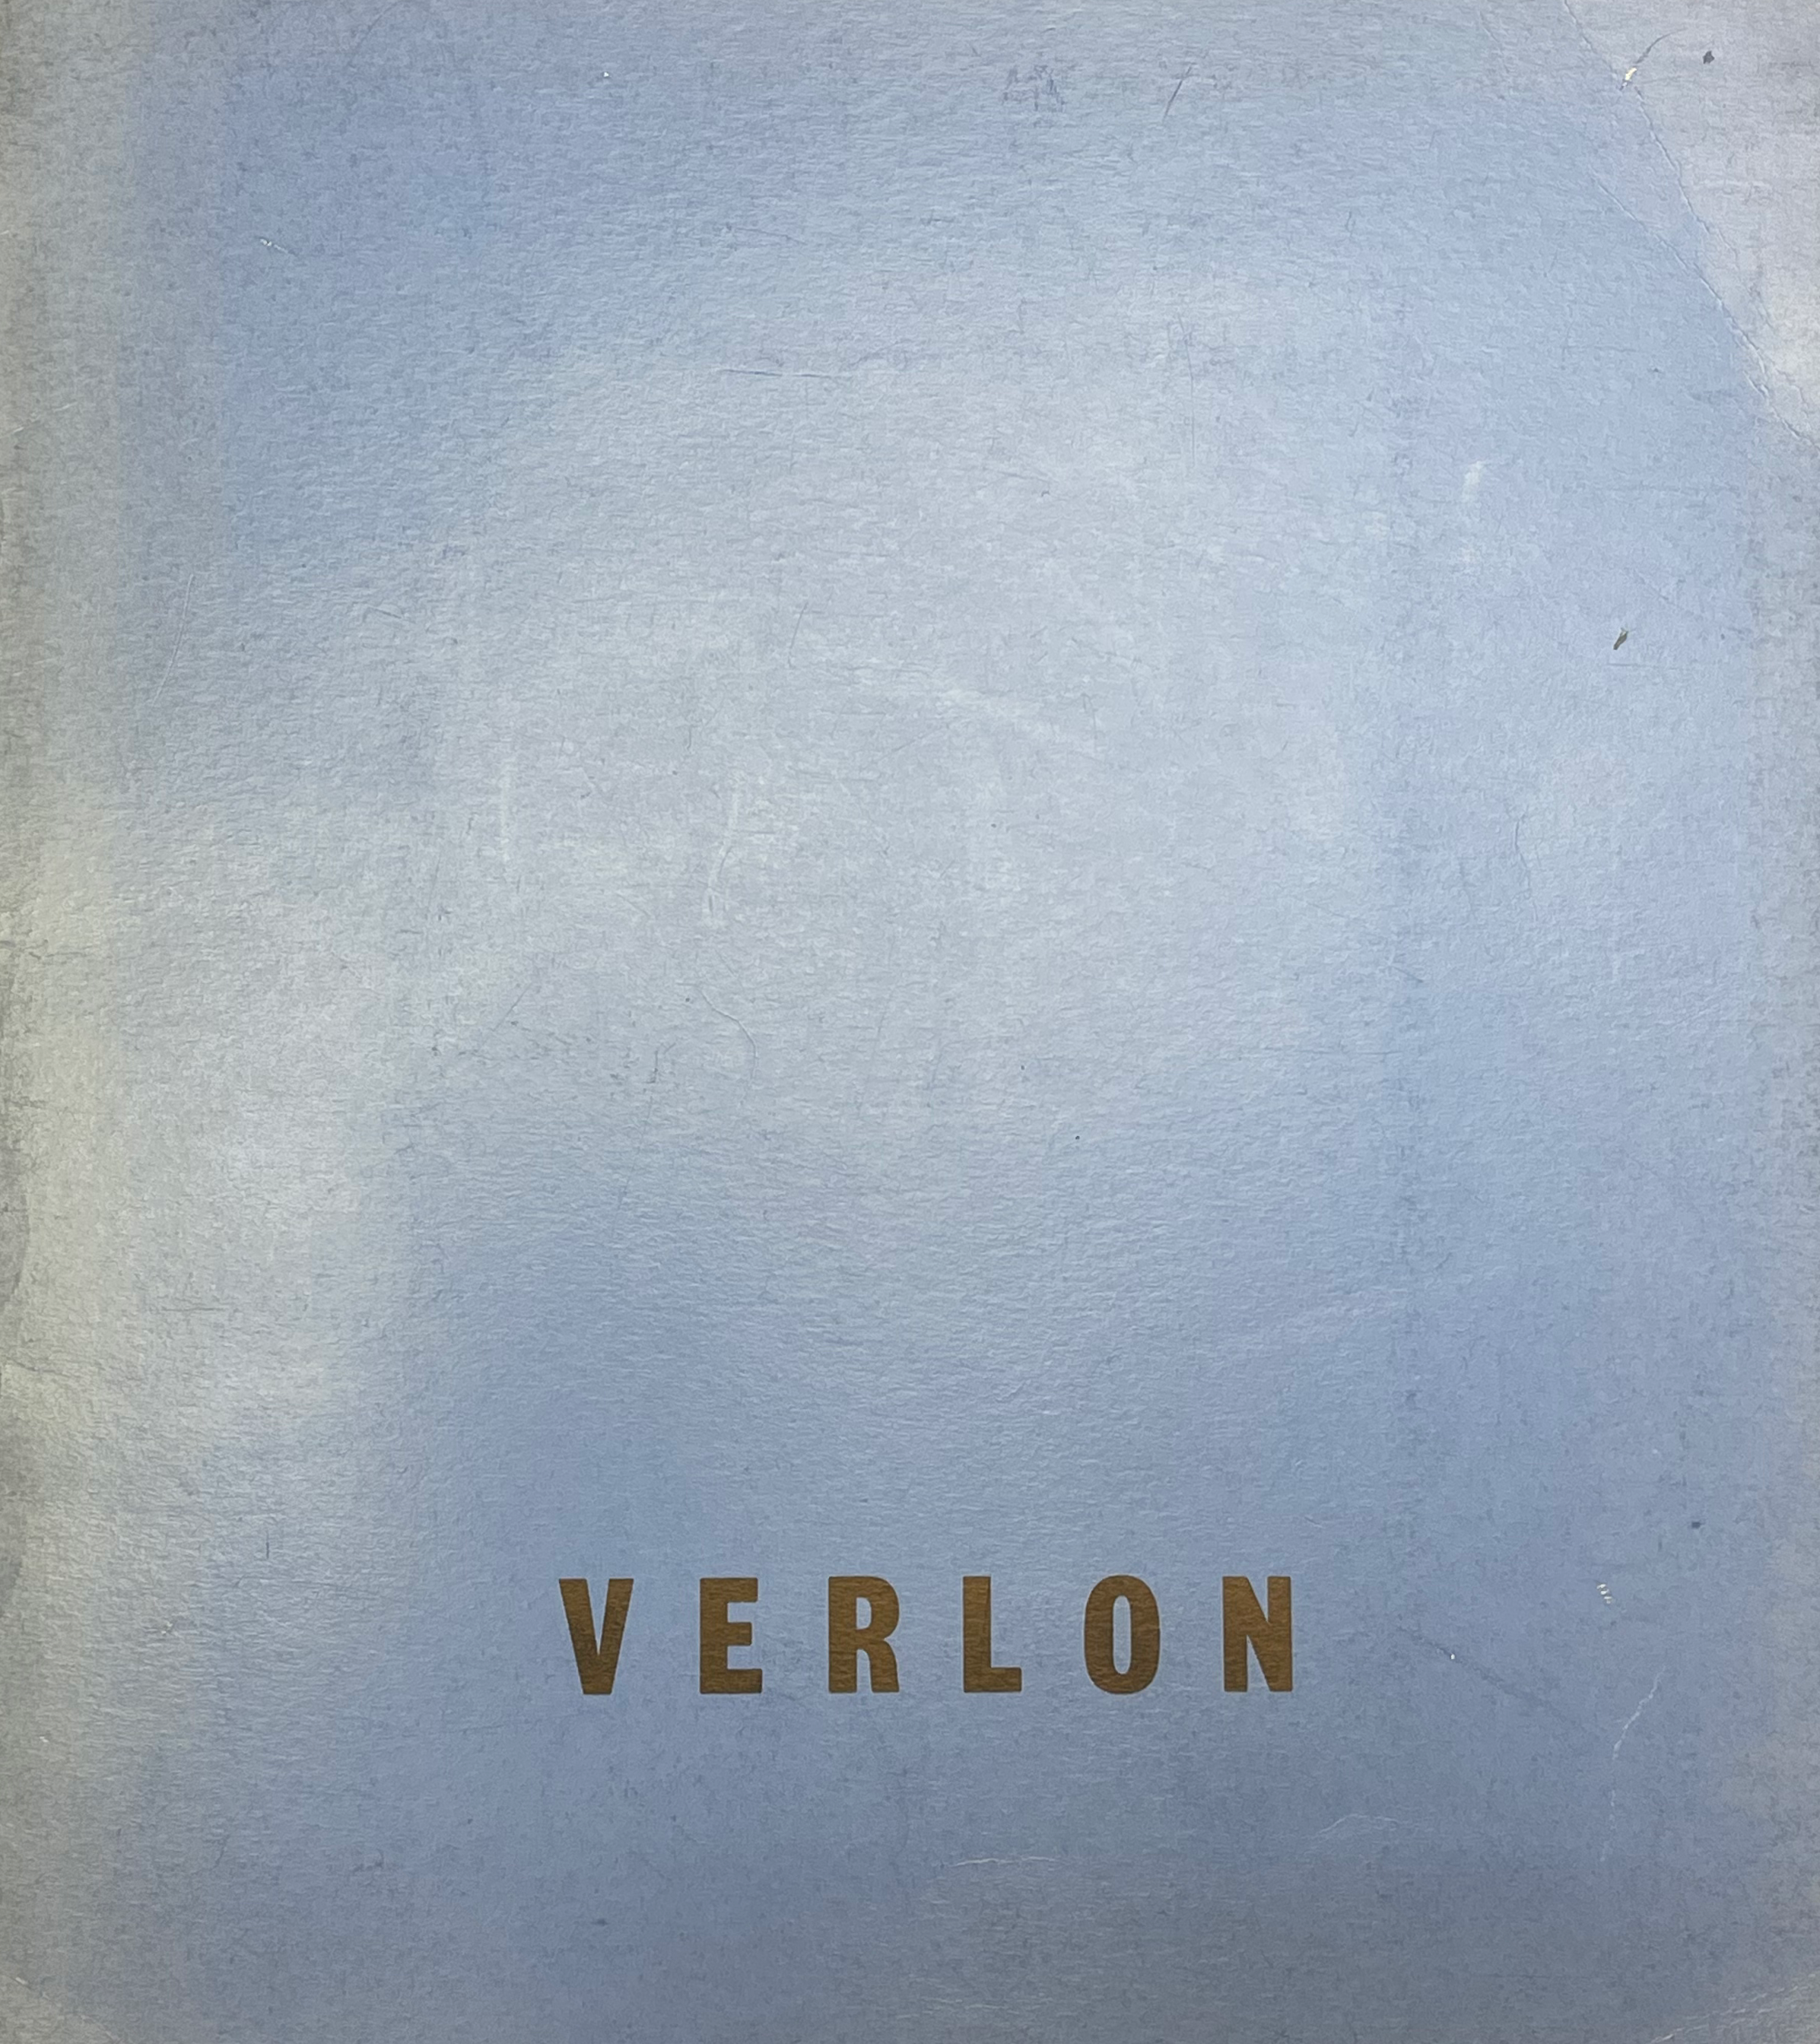 Brook Street Gallery catalogue from Verlon’s solo exhibition